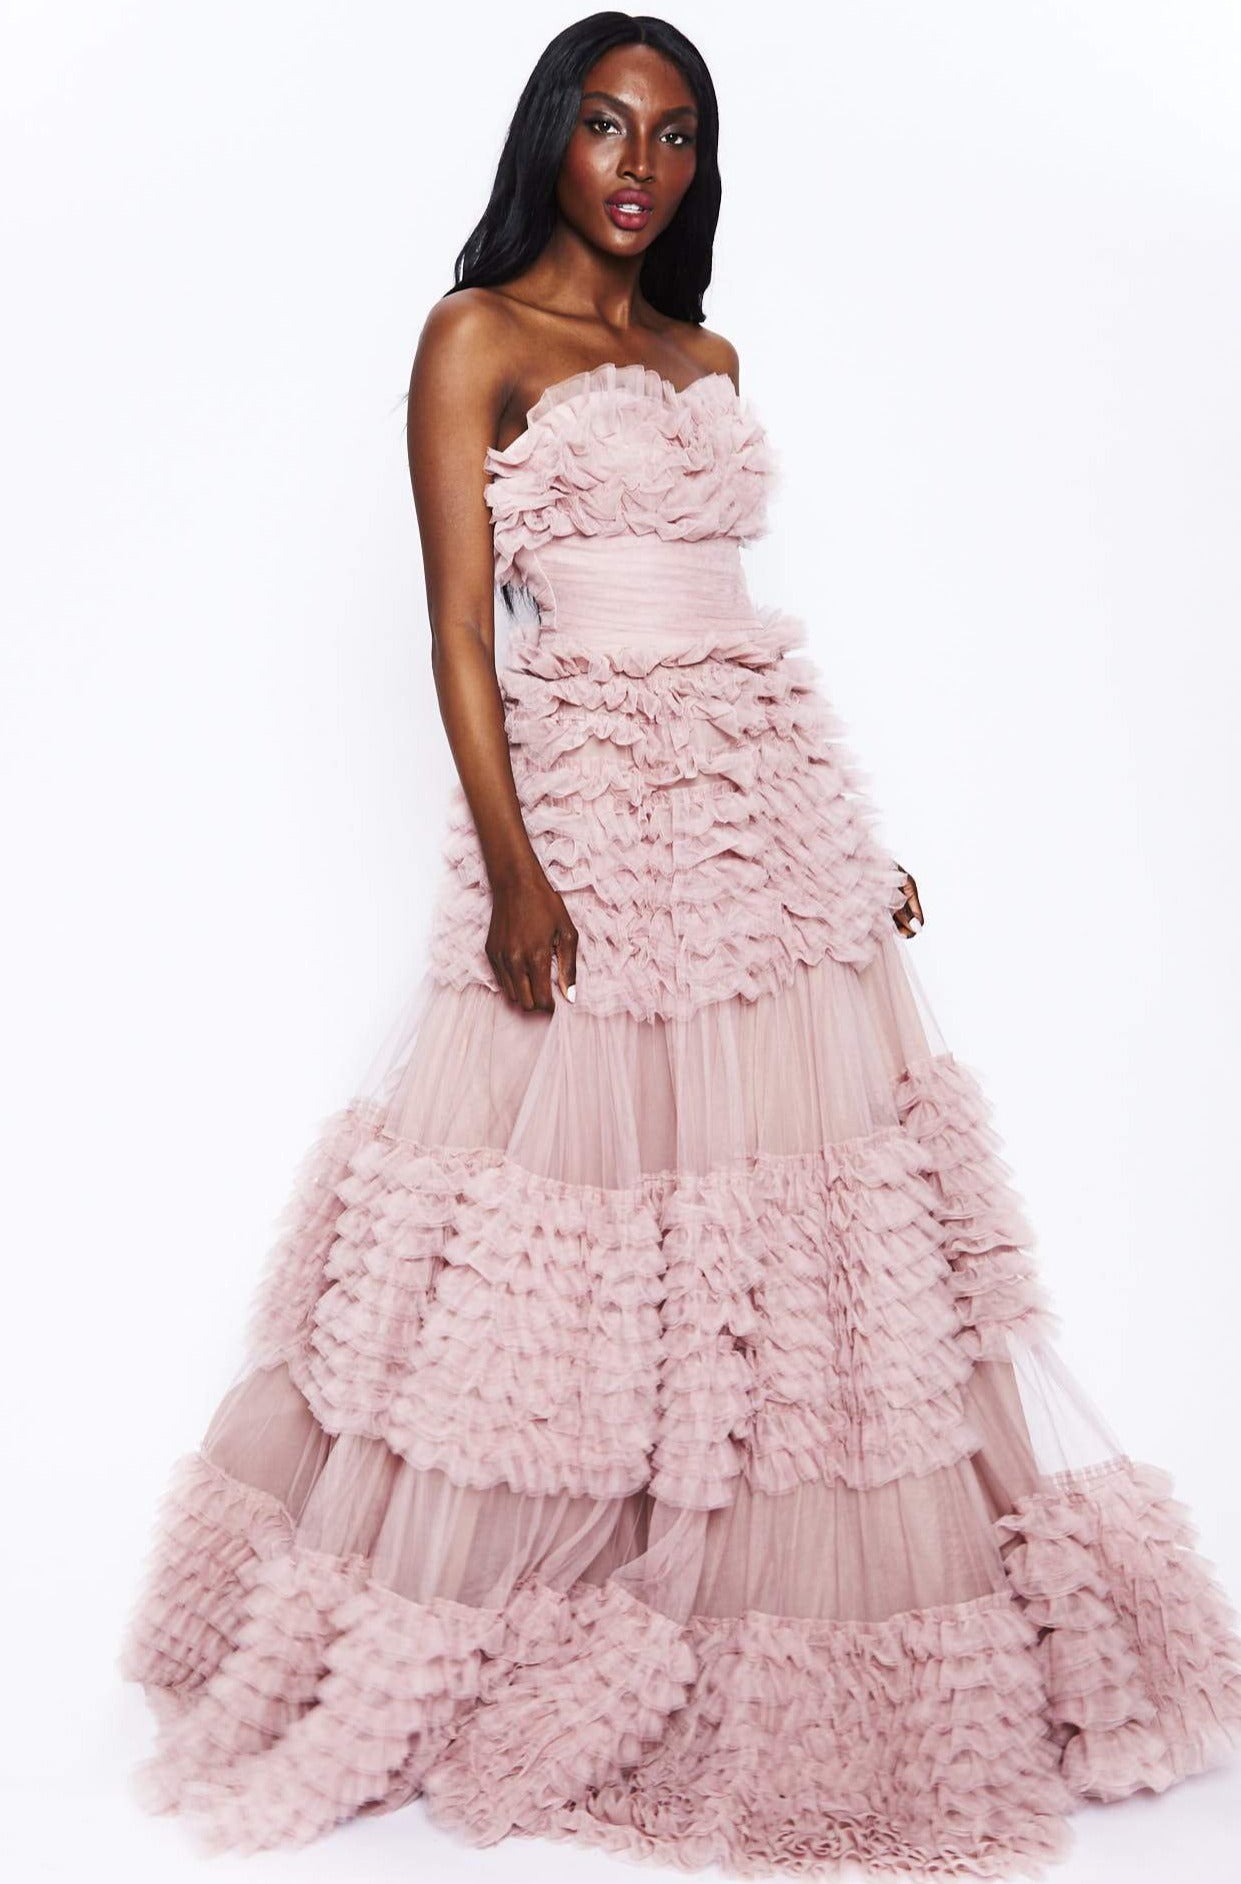 Fantasia Pink Ruffled Layers Gown by Gemy Maalouf - RENTAL – The Fitzroy